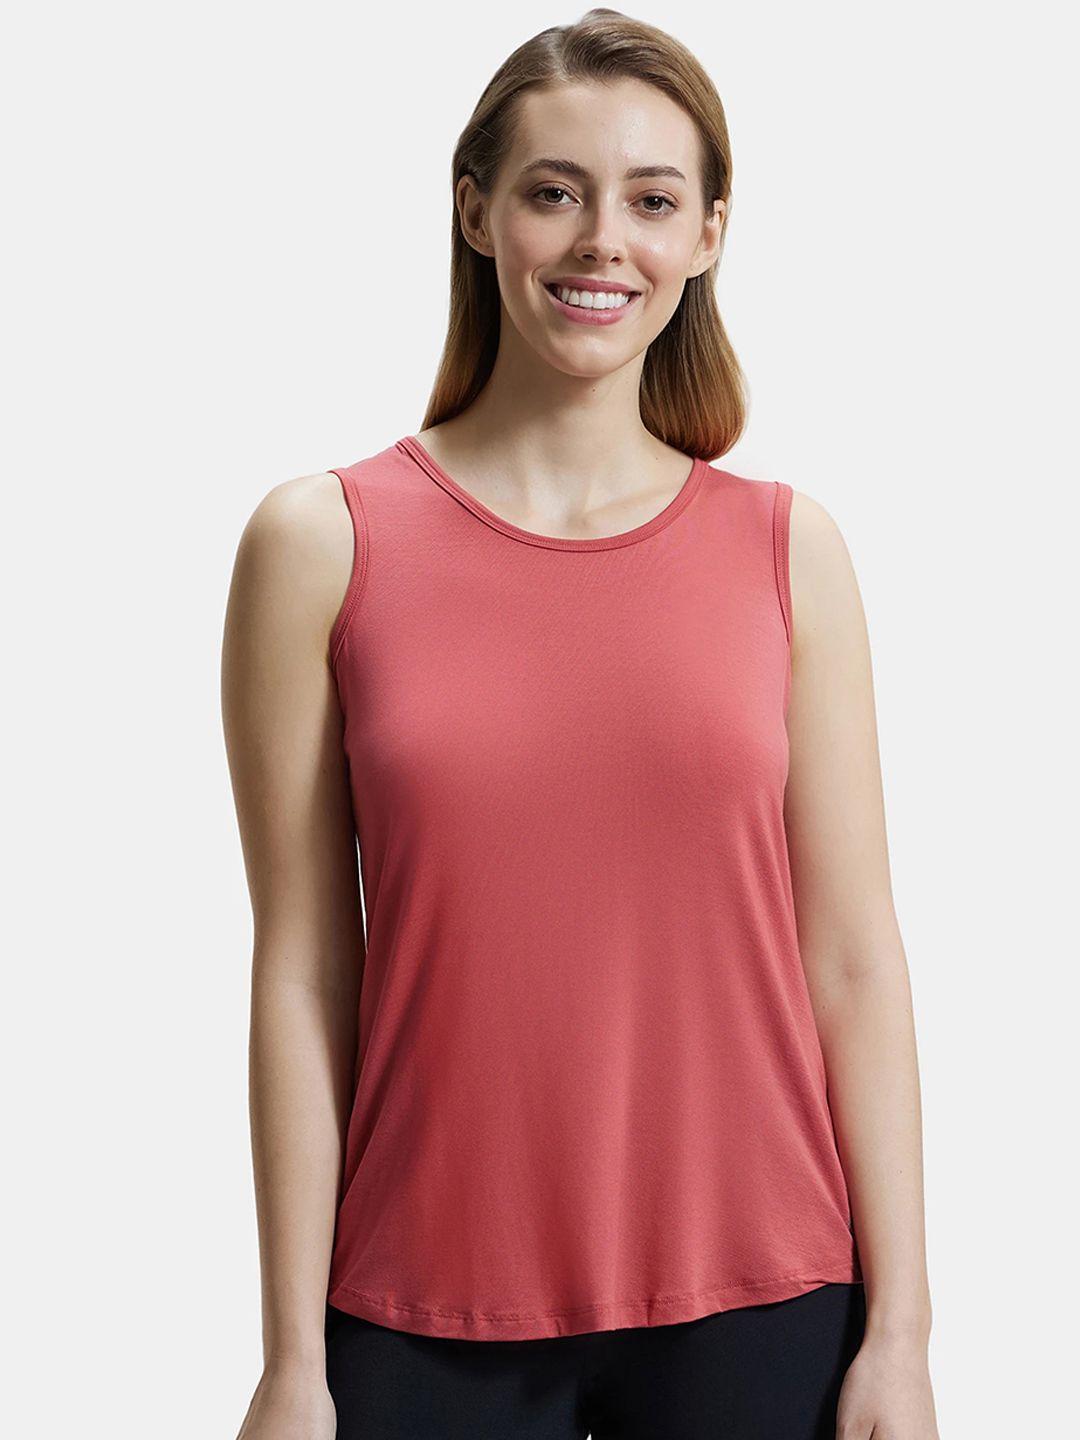 jockey-round-neck-relaxed-fit-sports-tank-top